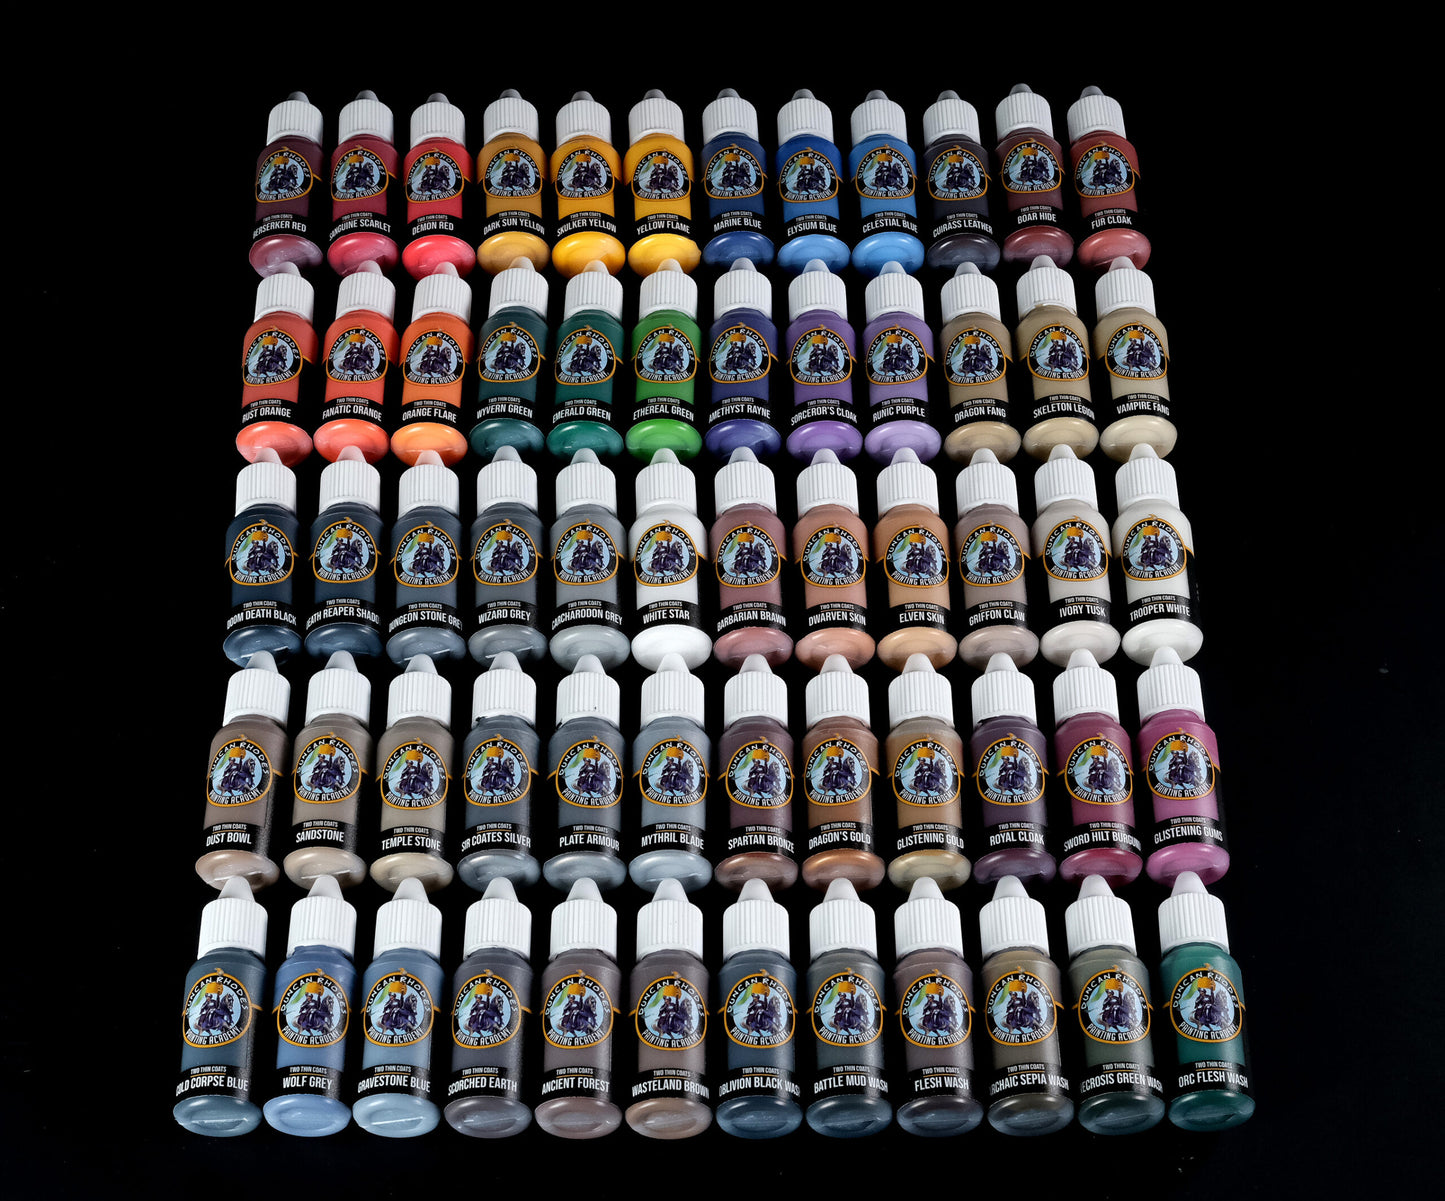 paint carrier filled with 60 bottles of two thin coats paint